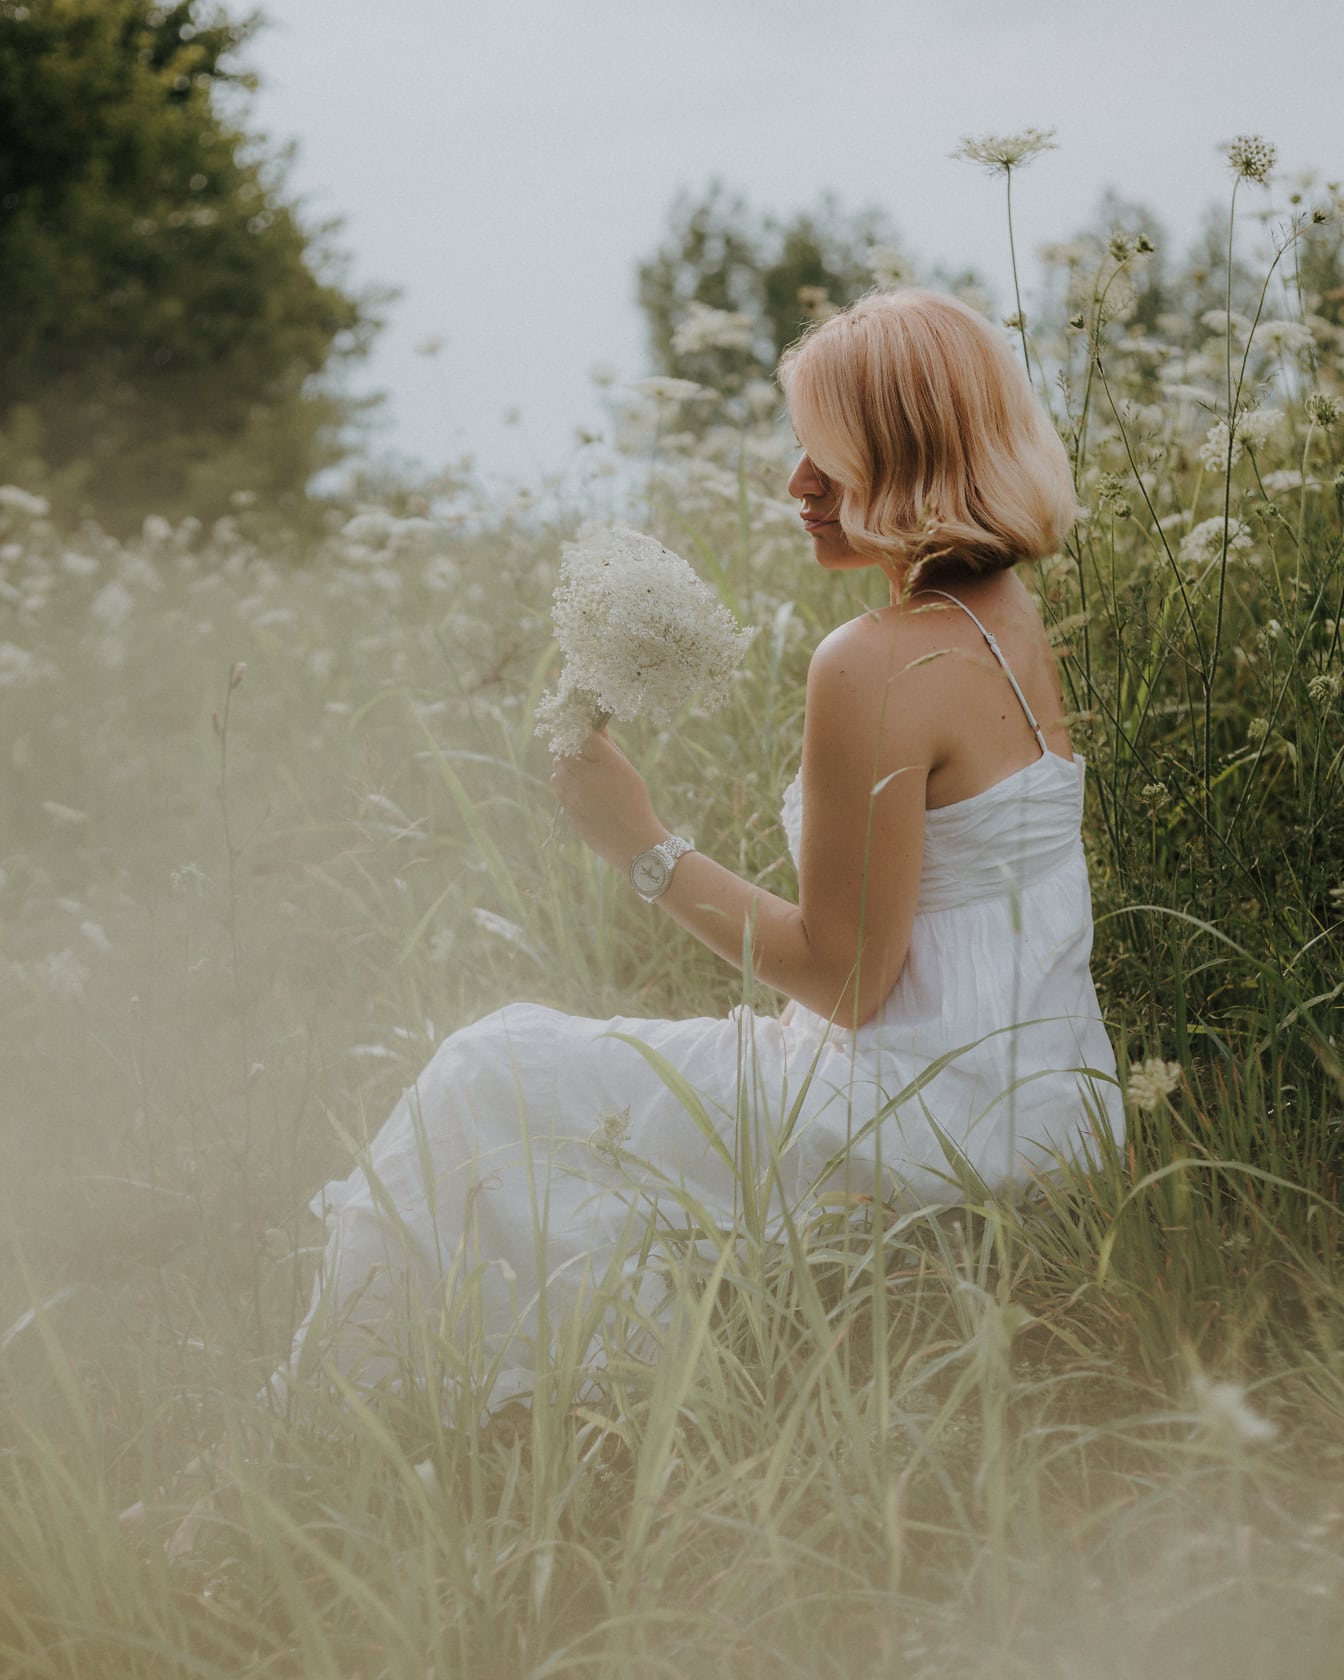 Lonely lady sitting in high meadow grass in white dress